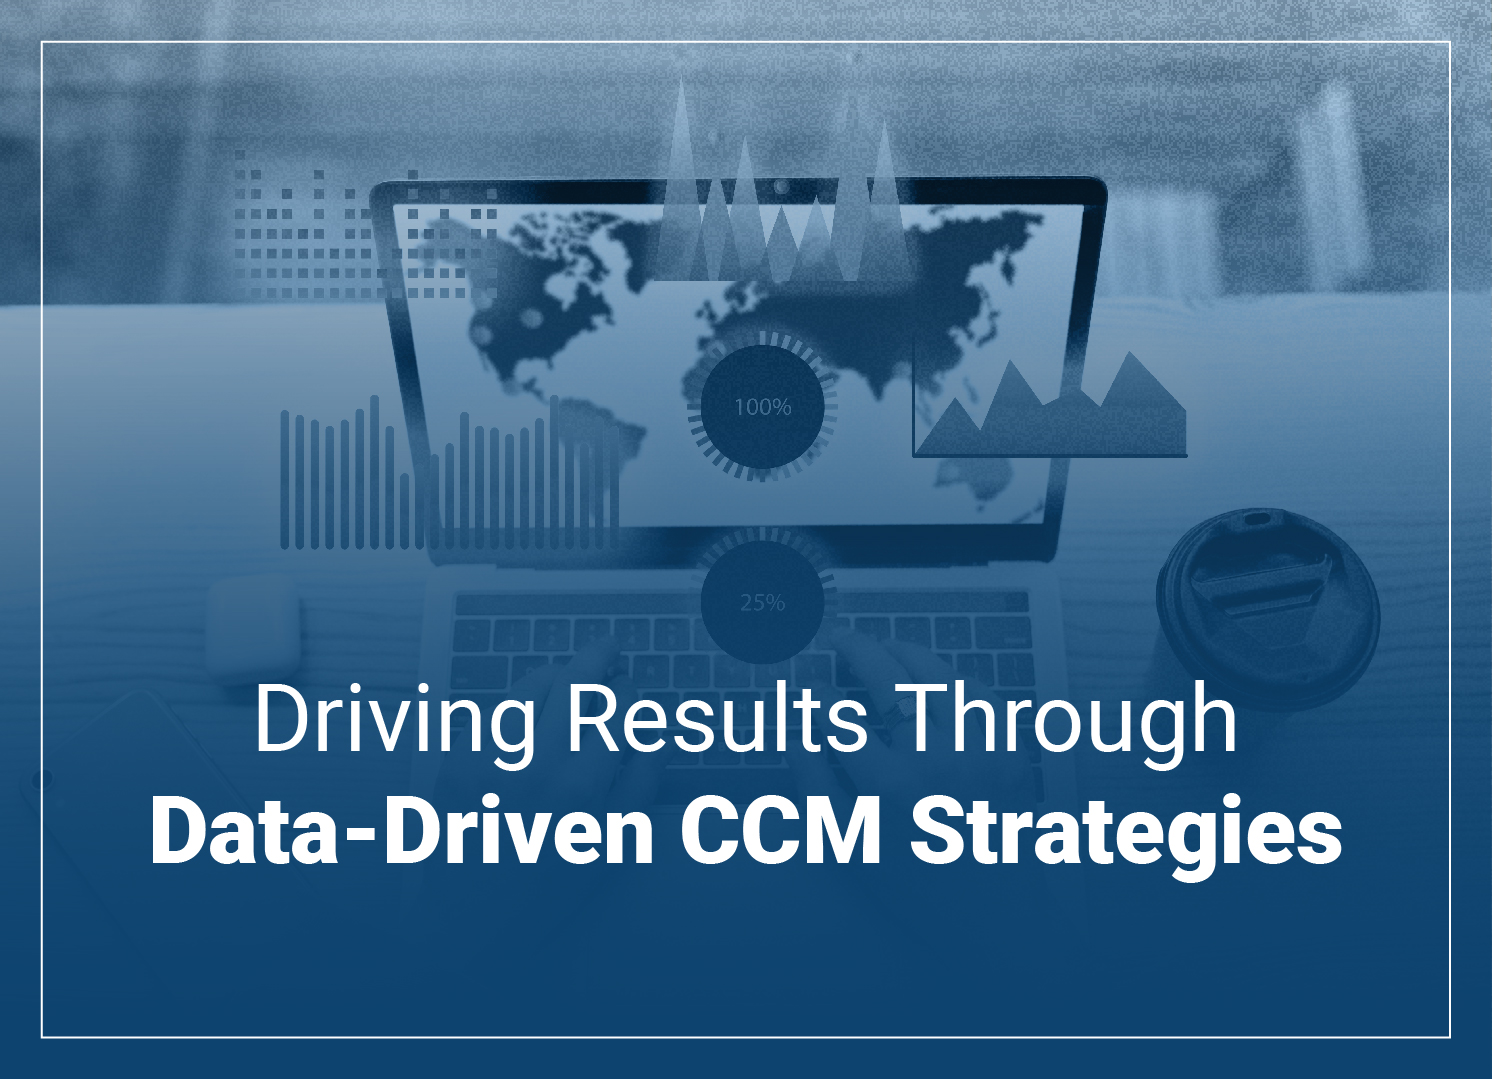 Driving Results Through Data-Driven CCM Strategies